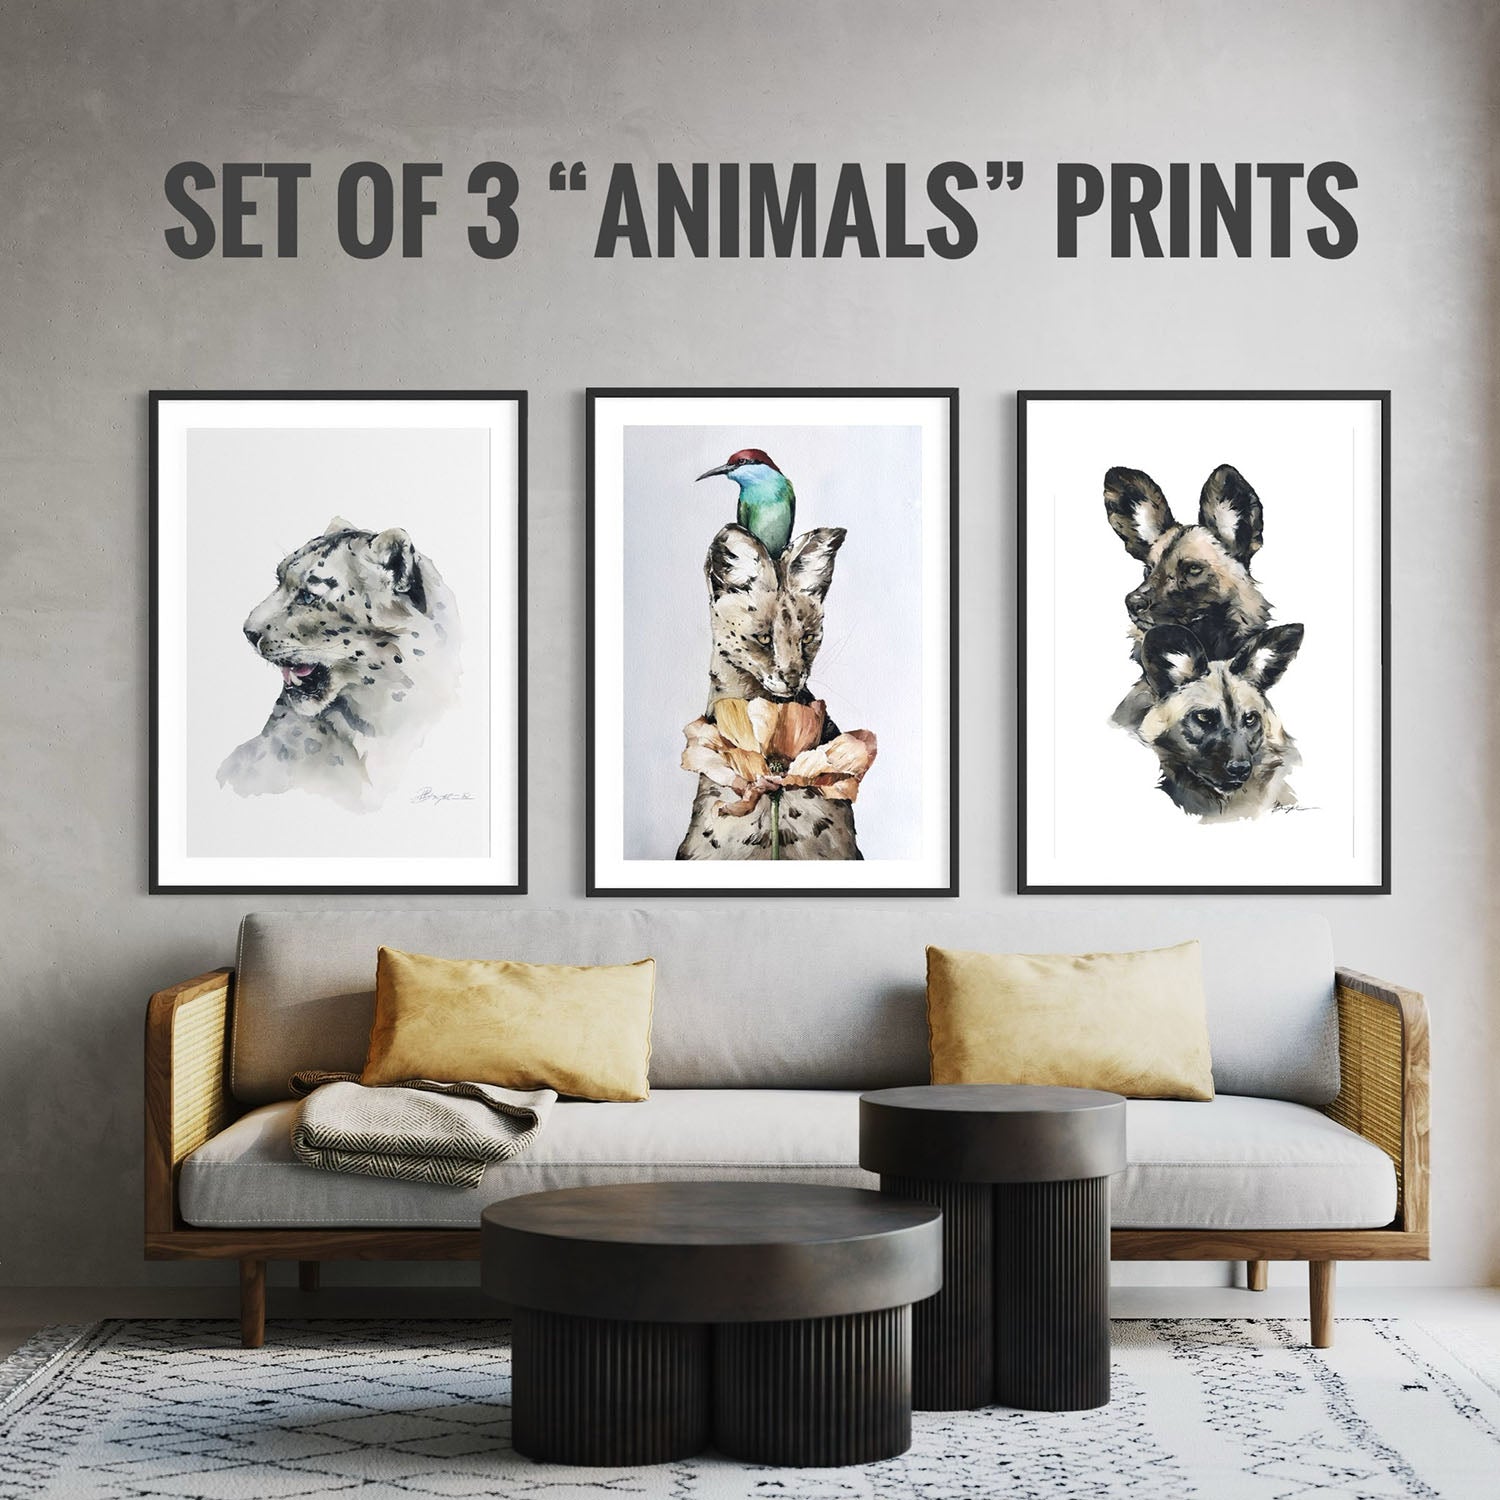 Set of 3 prints from Animals collection by Polina Bright